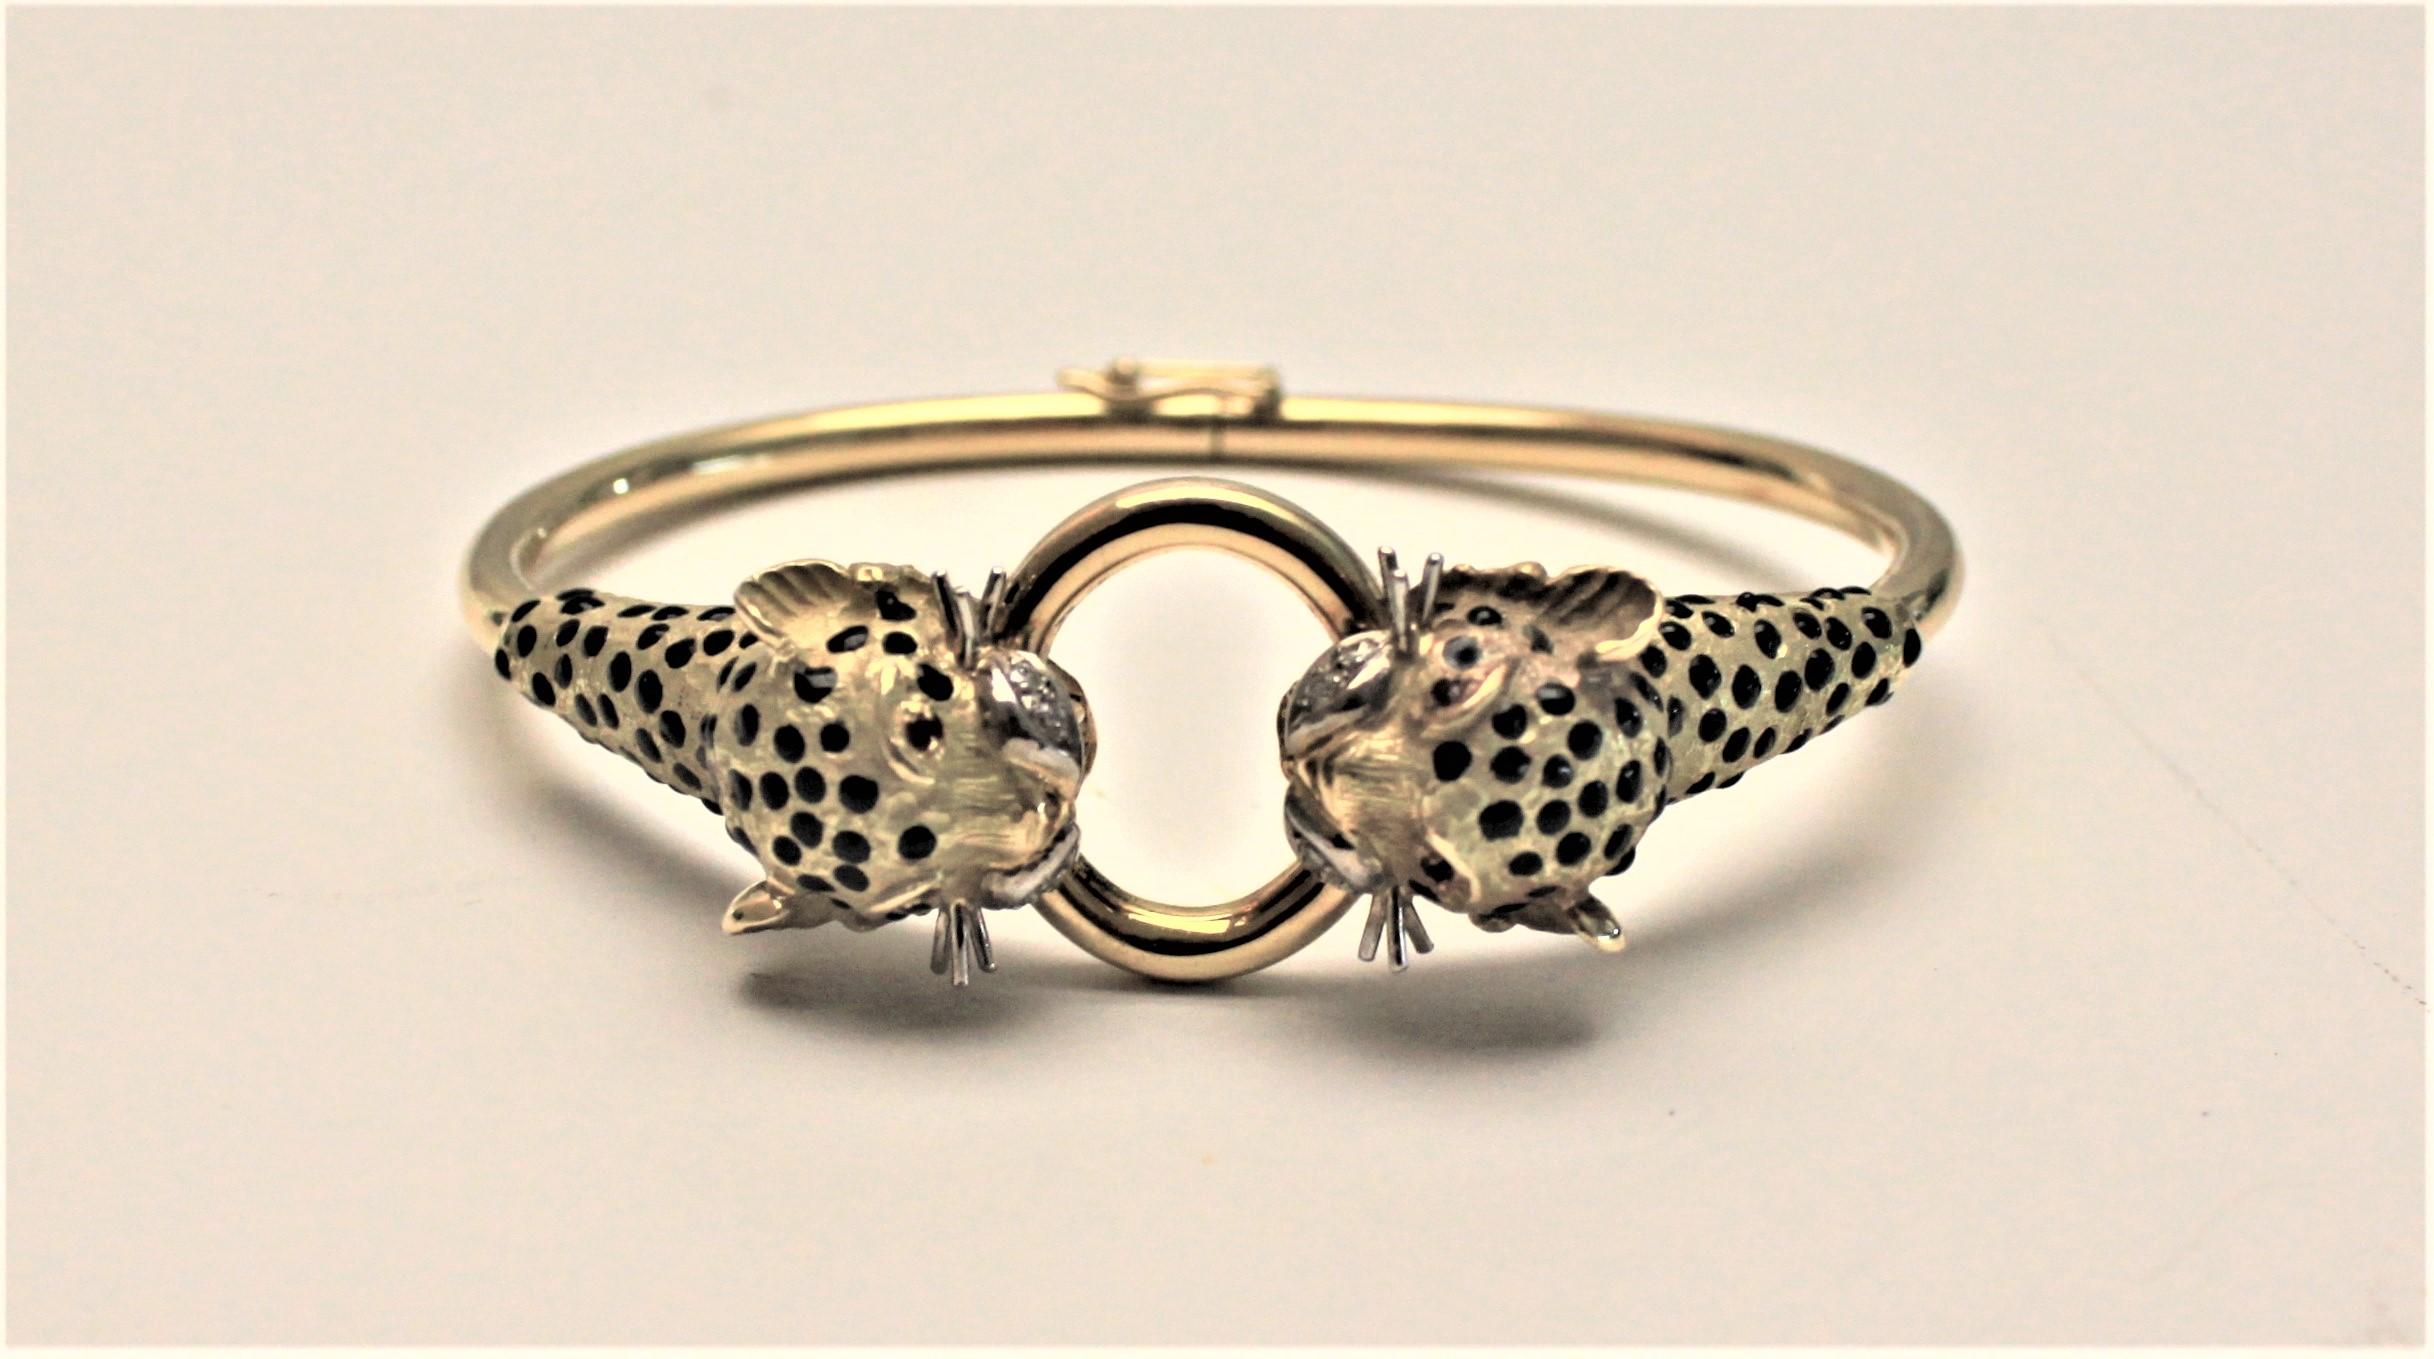 Hand-Crafted Ladies 18-Karat Yellow Gold Figural Cheetah Cuff Bracelet with Diamond Accents